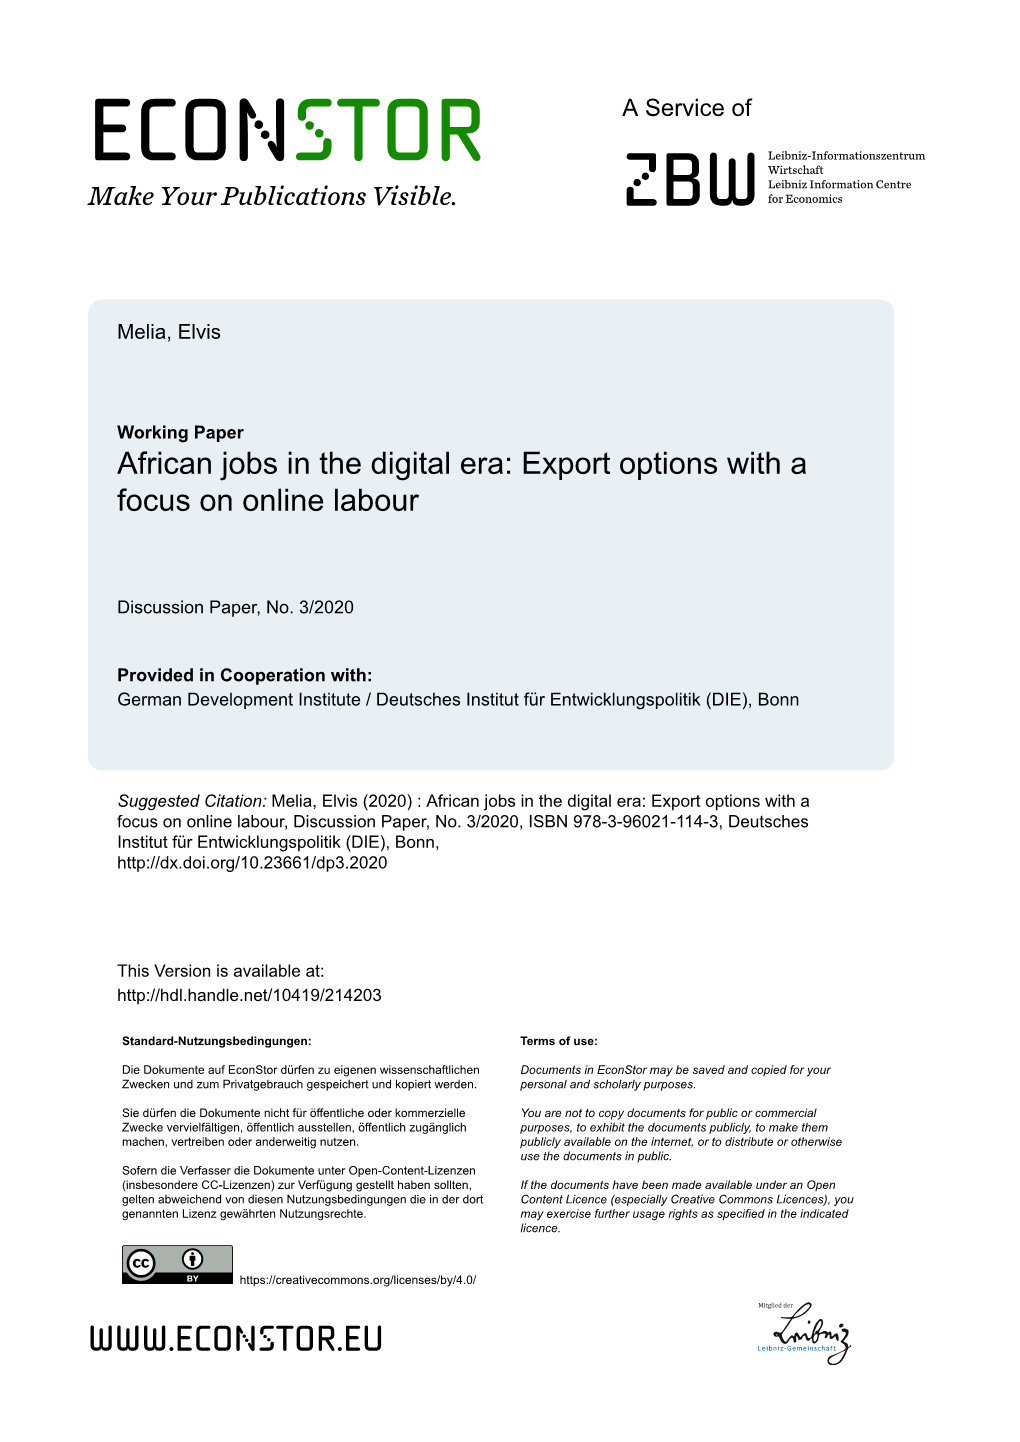 African Jobs in the Digital Era: Export Options with a Focus on Online Labour